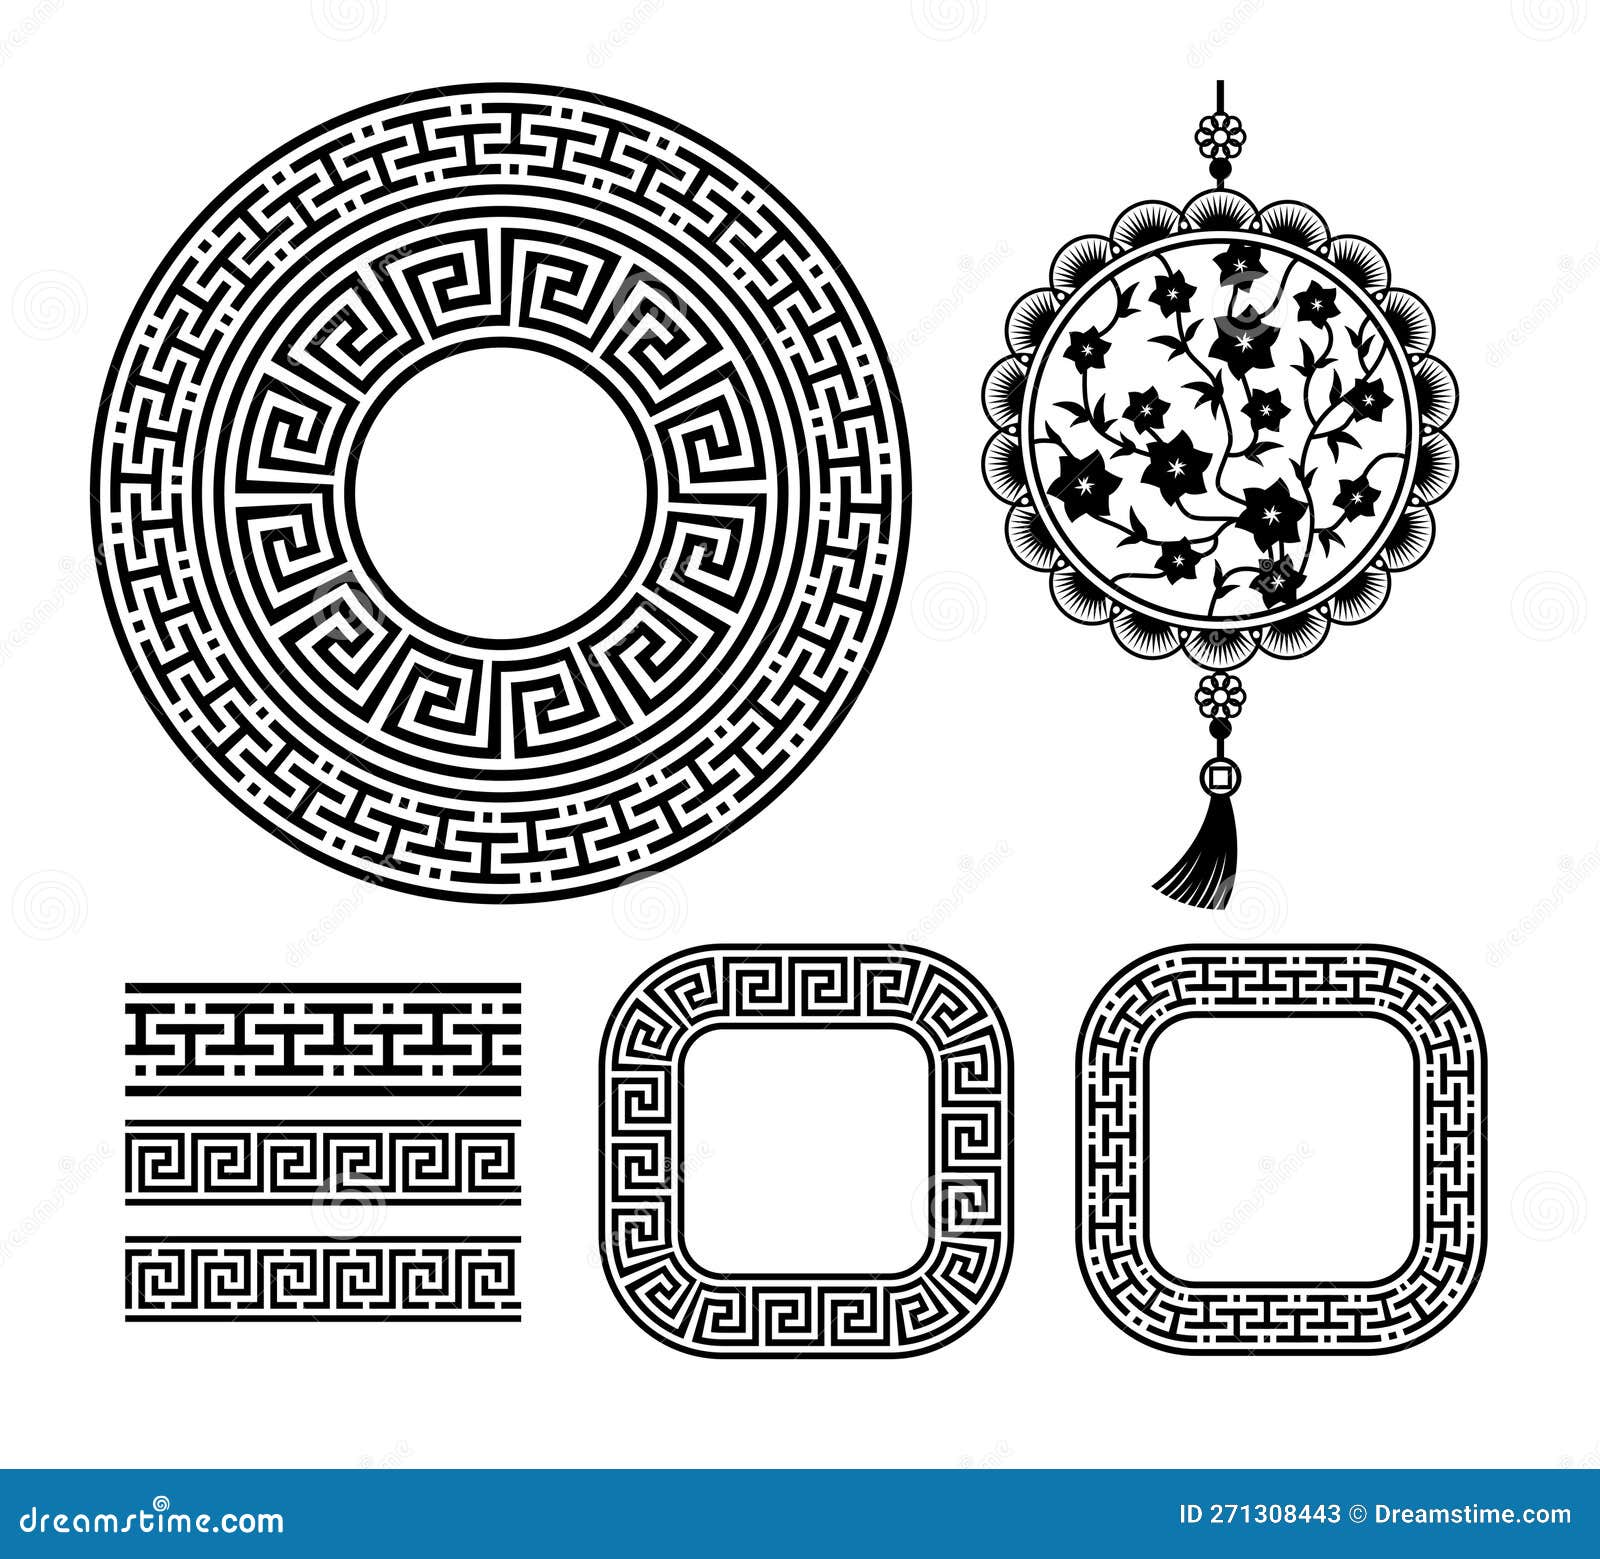 forms of chinese coins and amulets with ornaments. realistic 